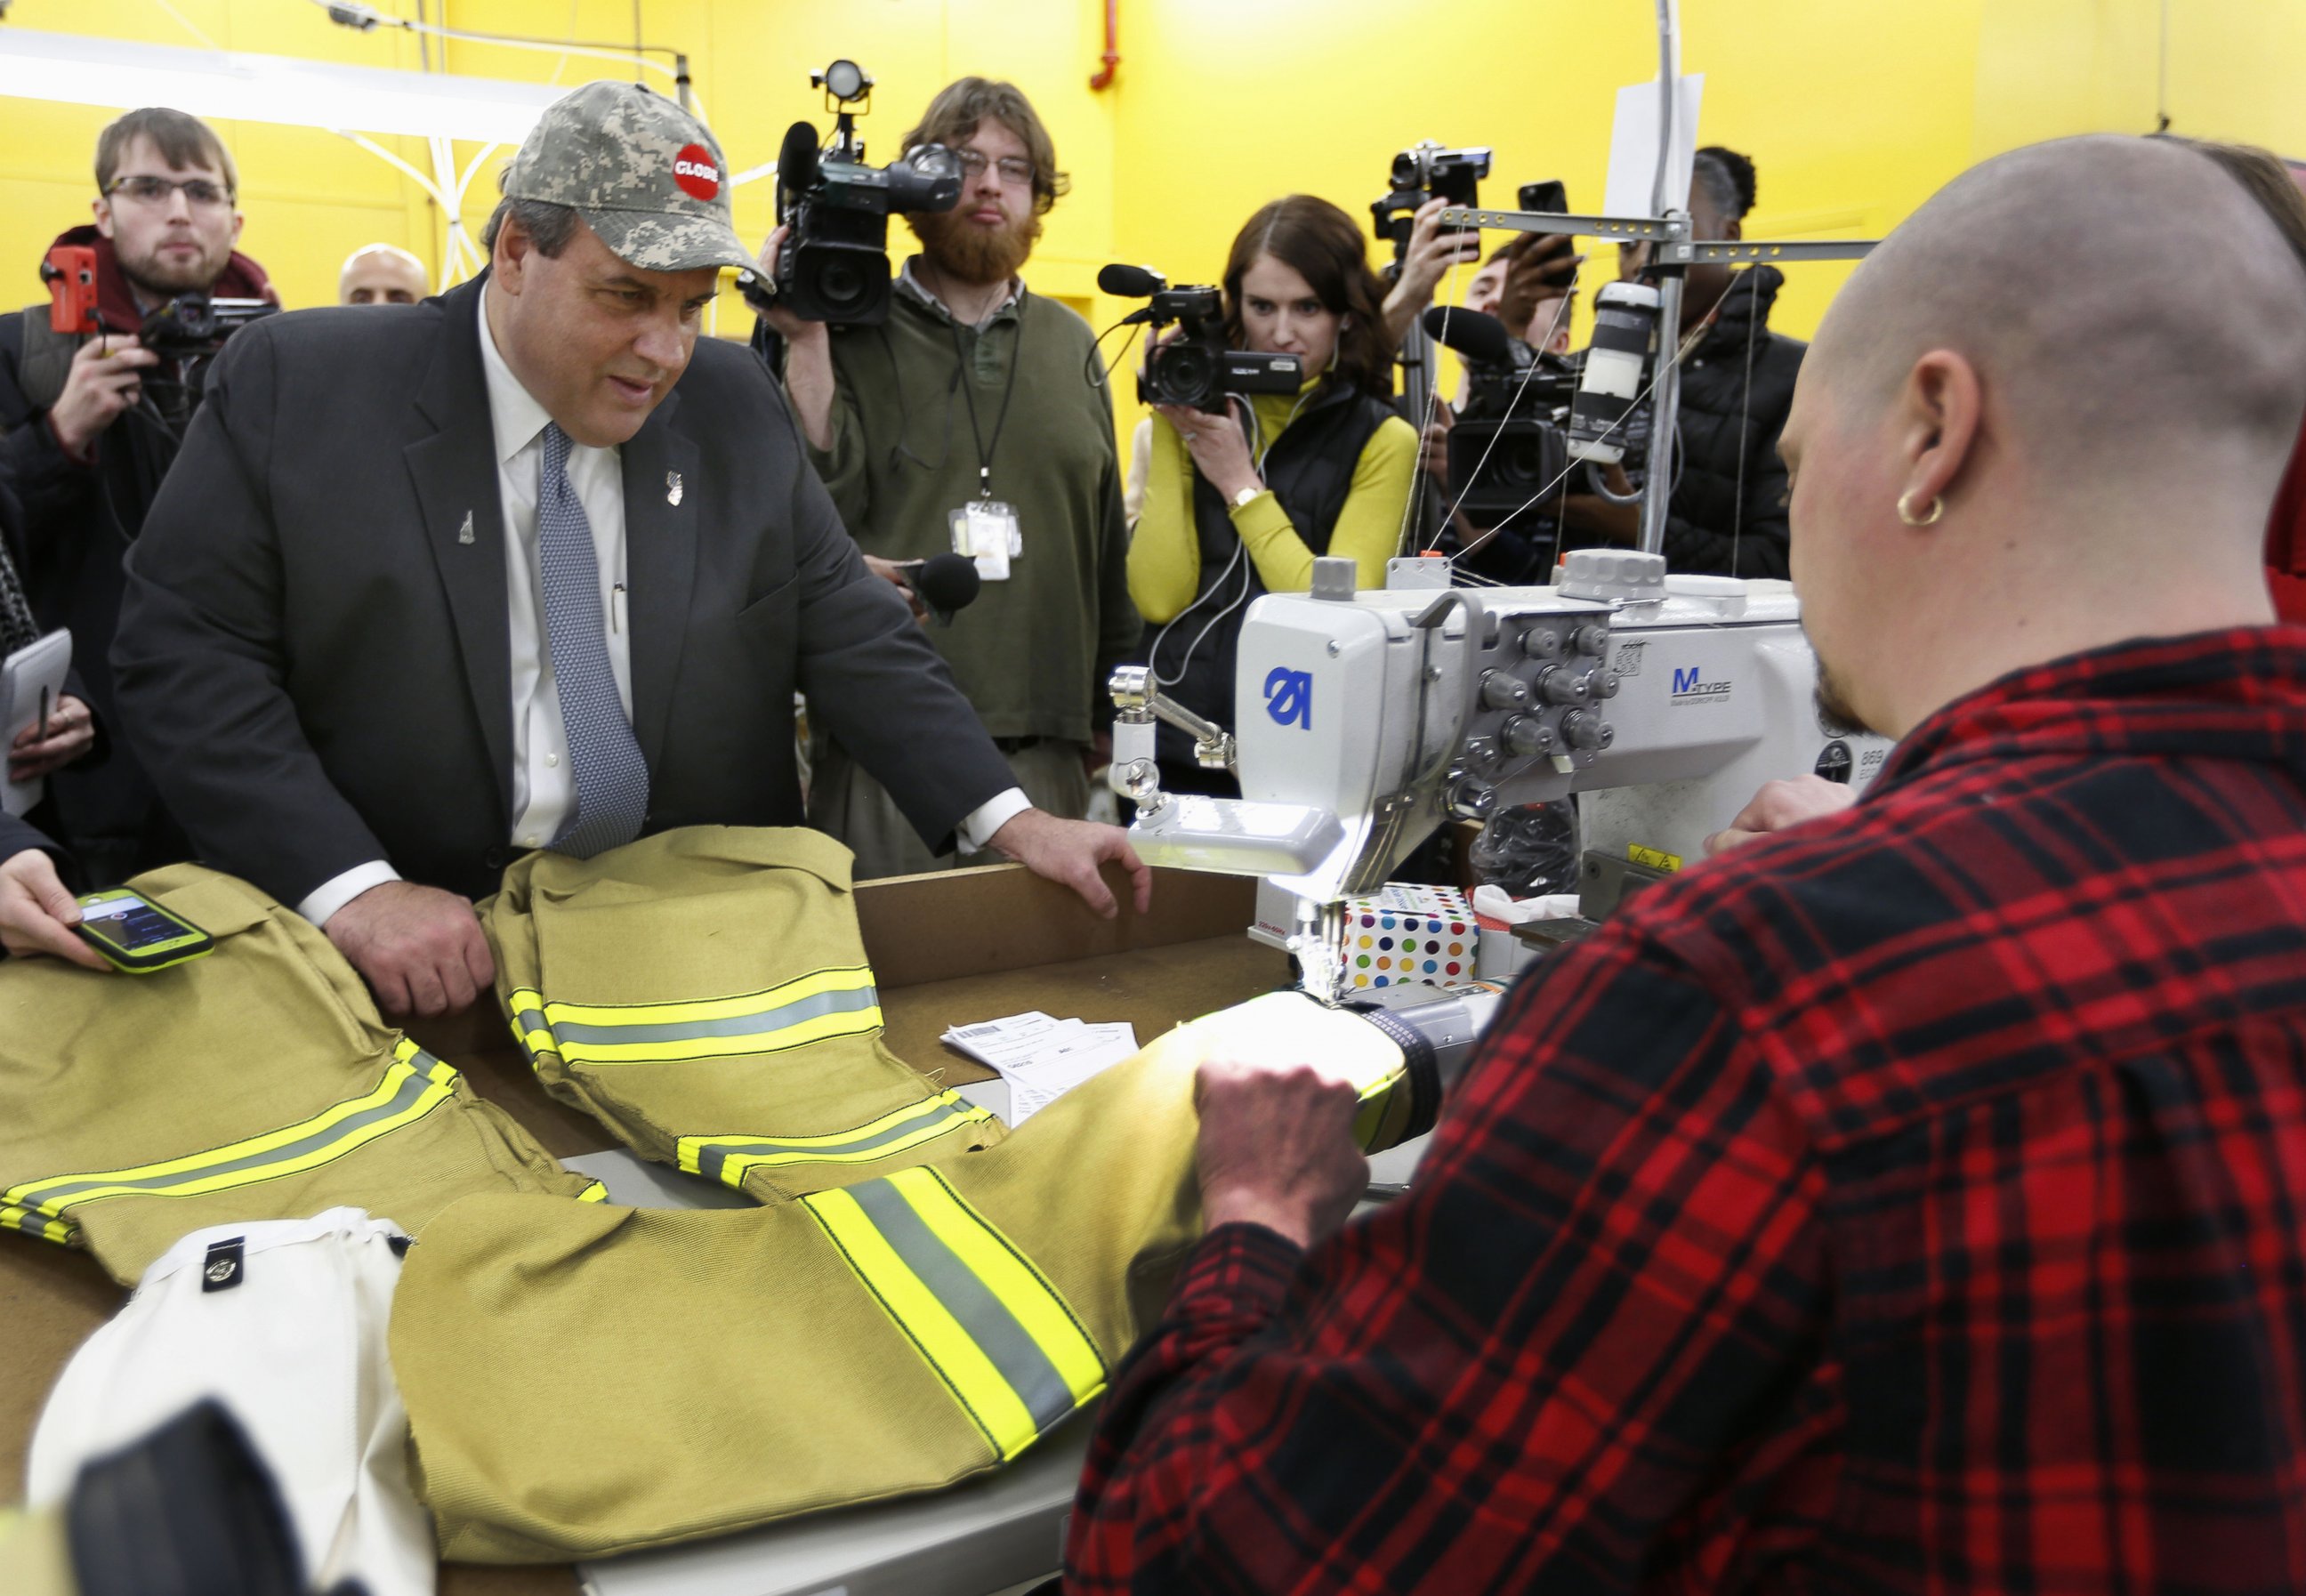 PHOTO: Republican presidential candidate, New Jersey Gov.Chris Christie watches as Tom Carr sews sleeves on a firefighter suit during a campaign stop at Globe Manufacturing, Jan. 21, 2016, in Pittsfield, N.H.